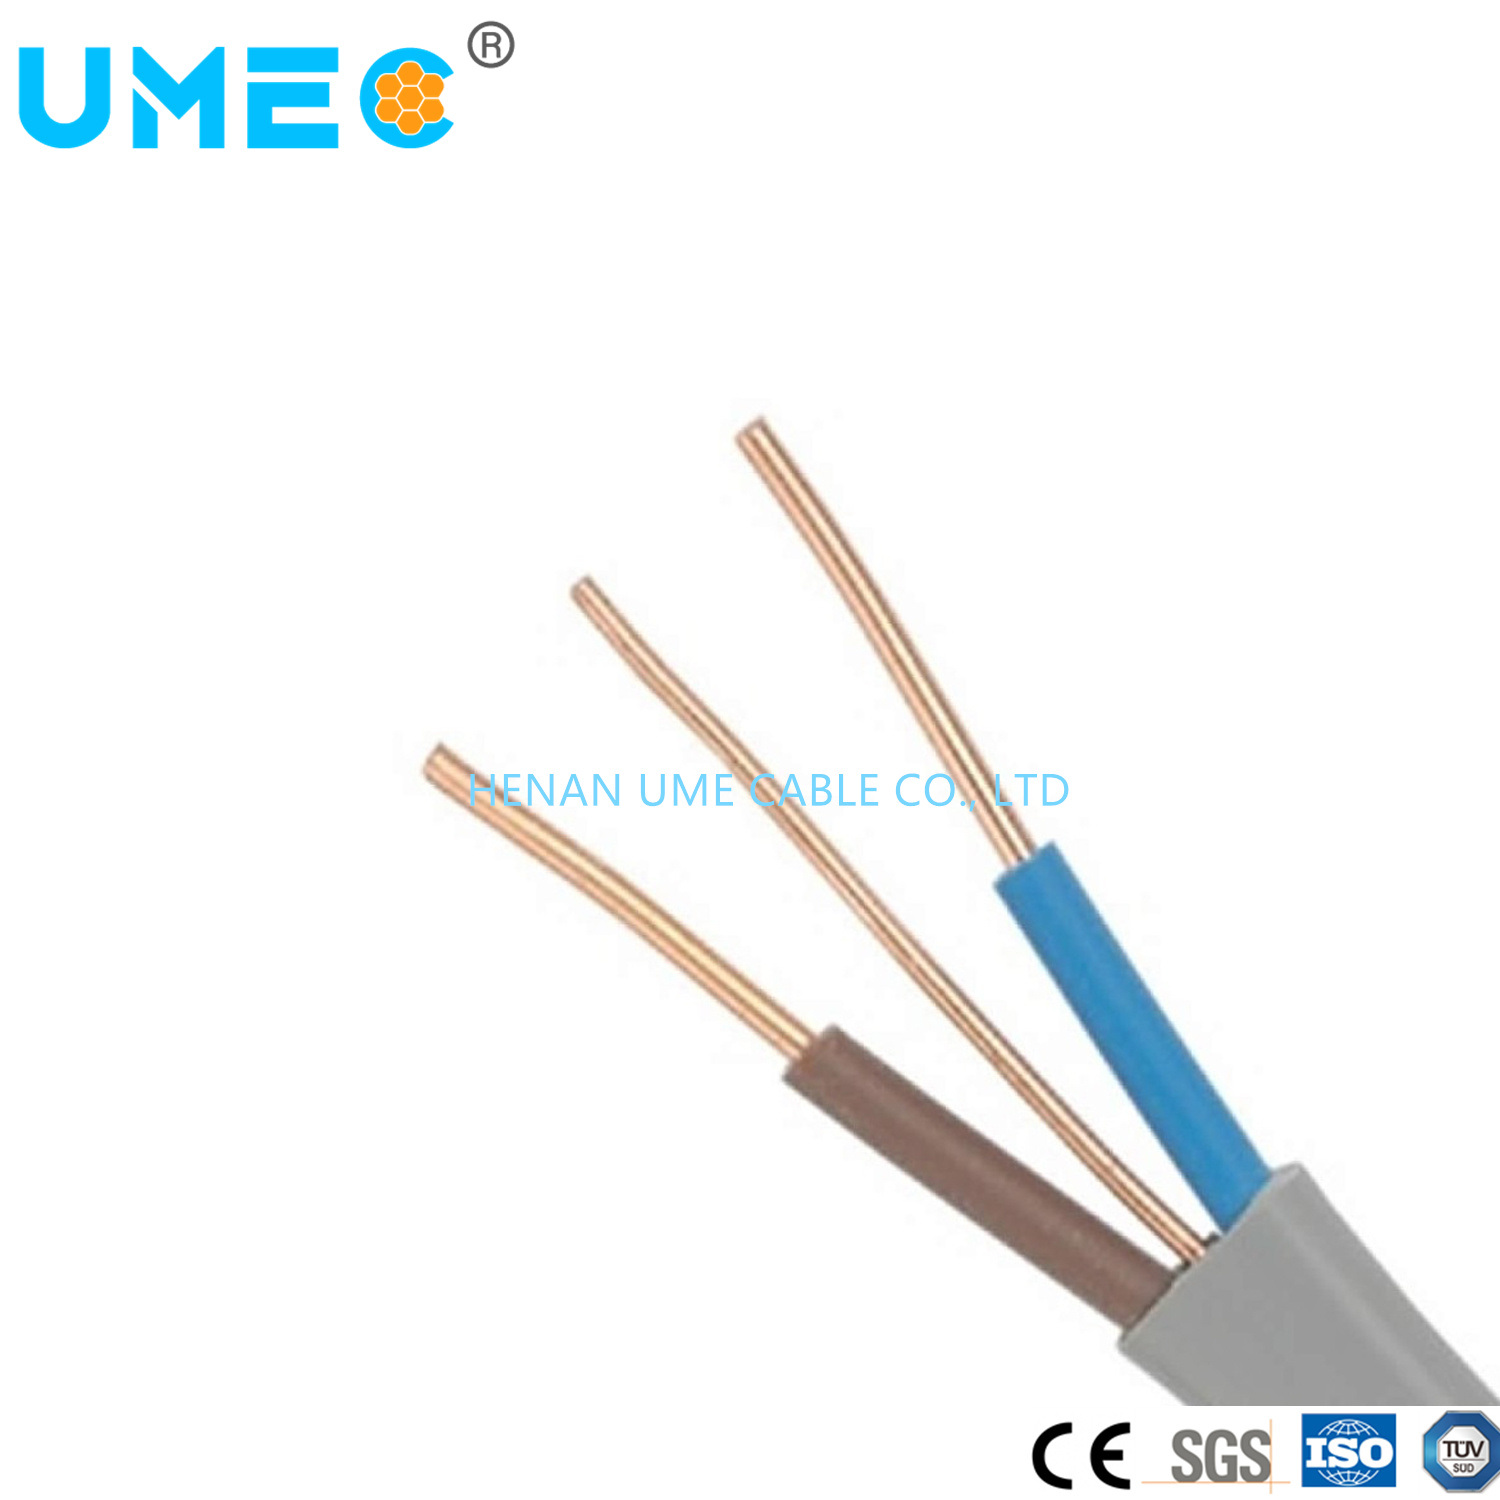 Low Voltage Twin and Earth Wires 6242y Flat Cable PVC Insulated Earth Wire 6242y PVC Wire for Buliding